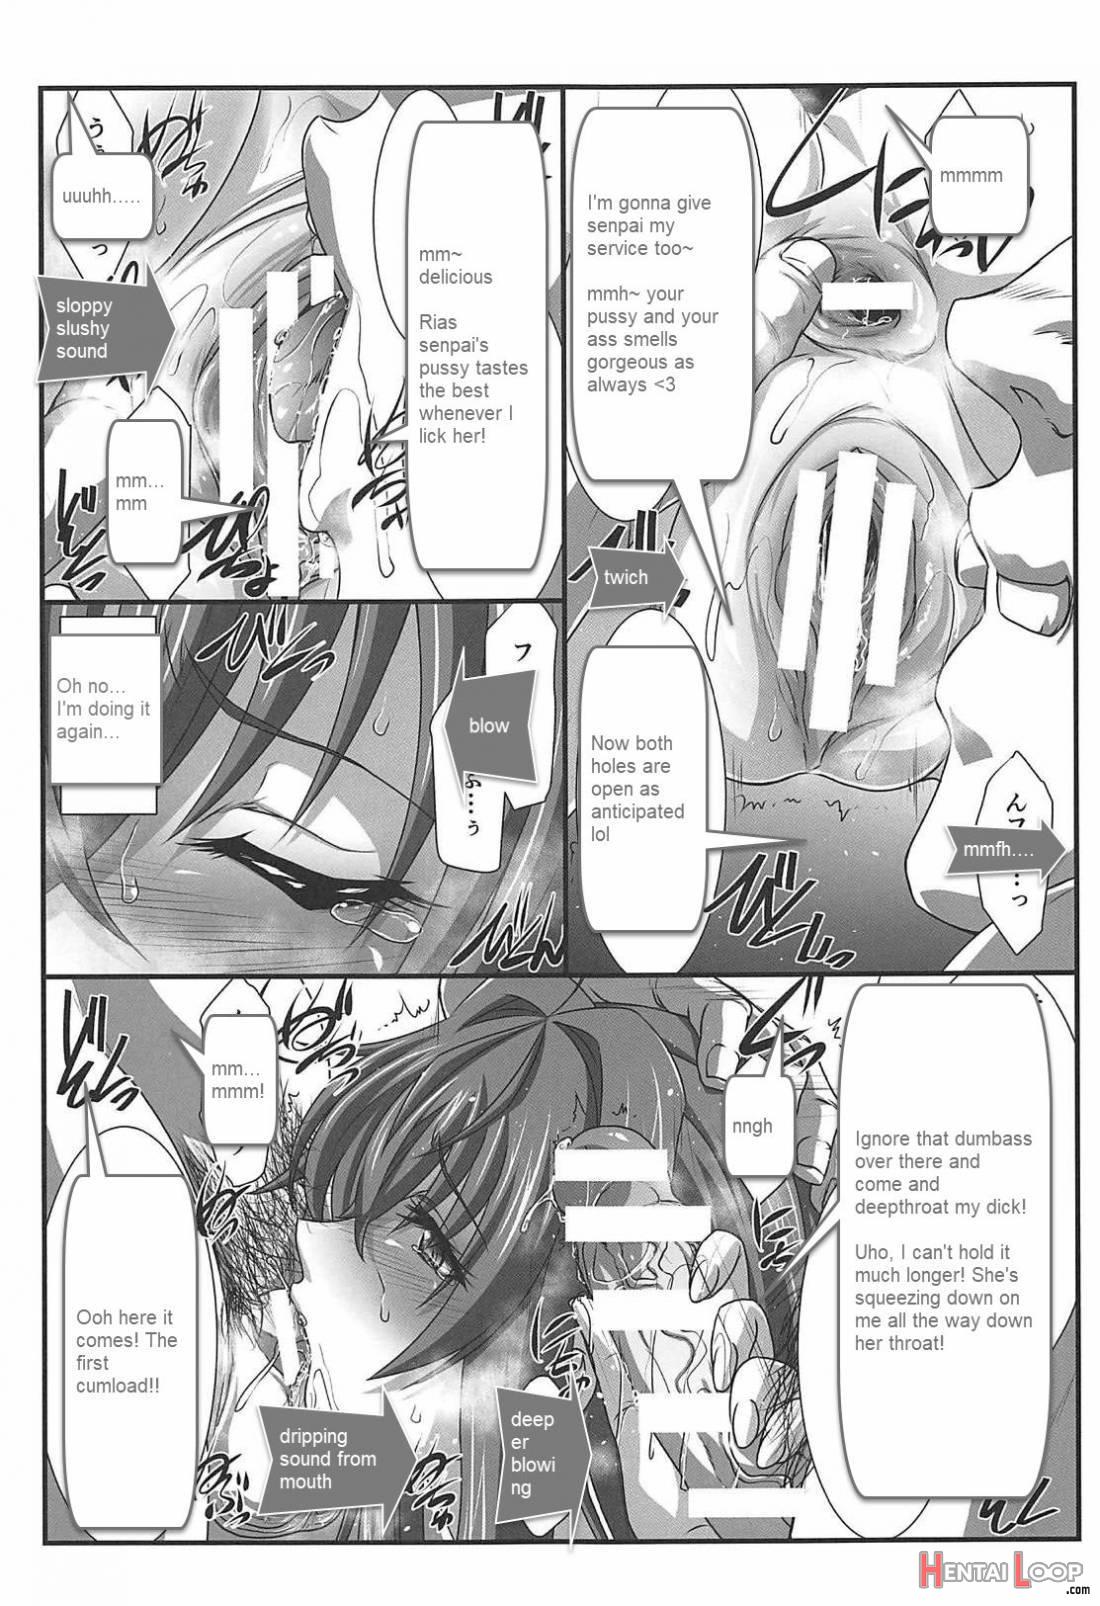 SPIRAL ZONE DxD II page 6